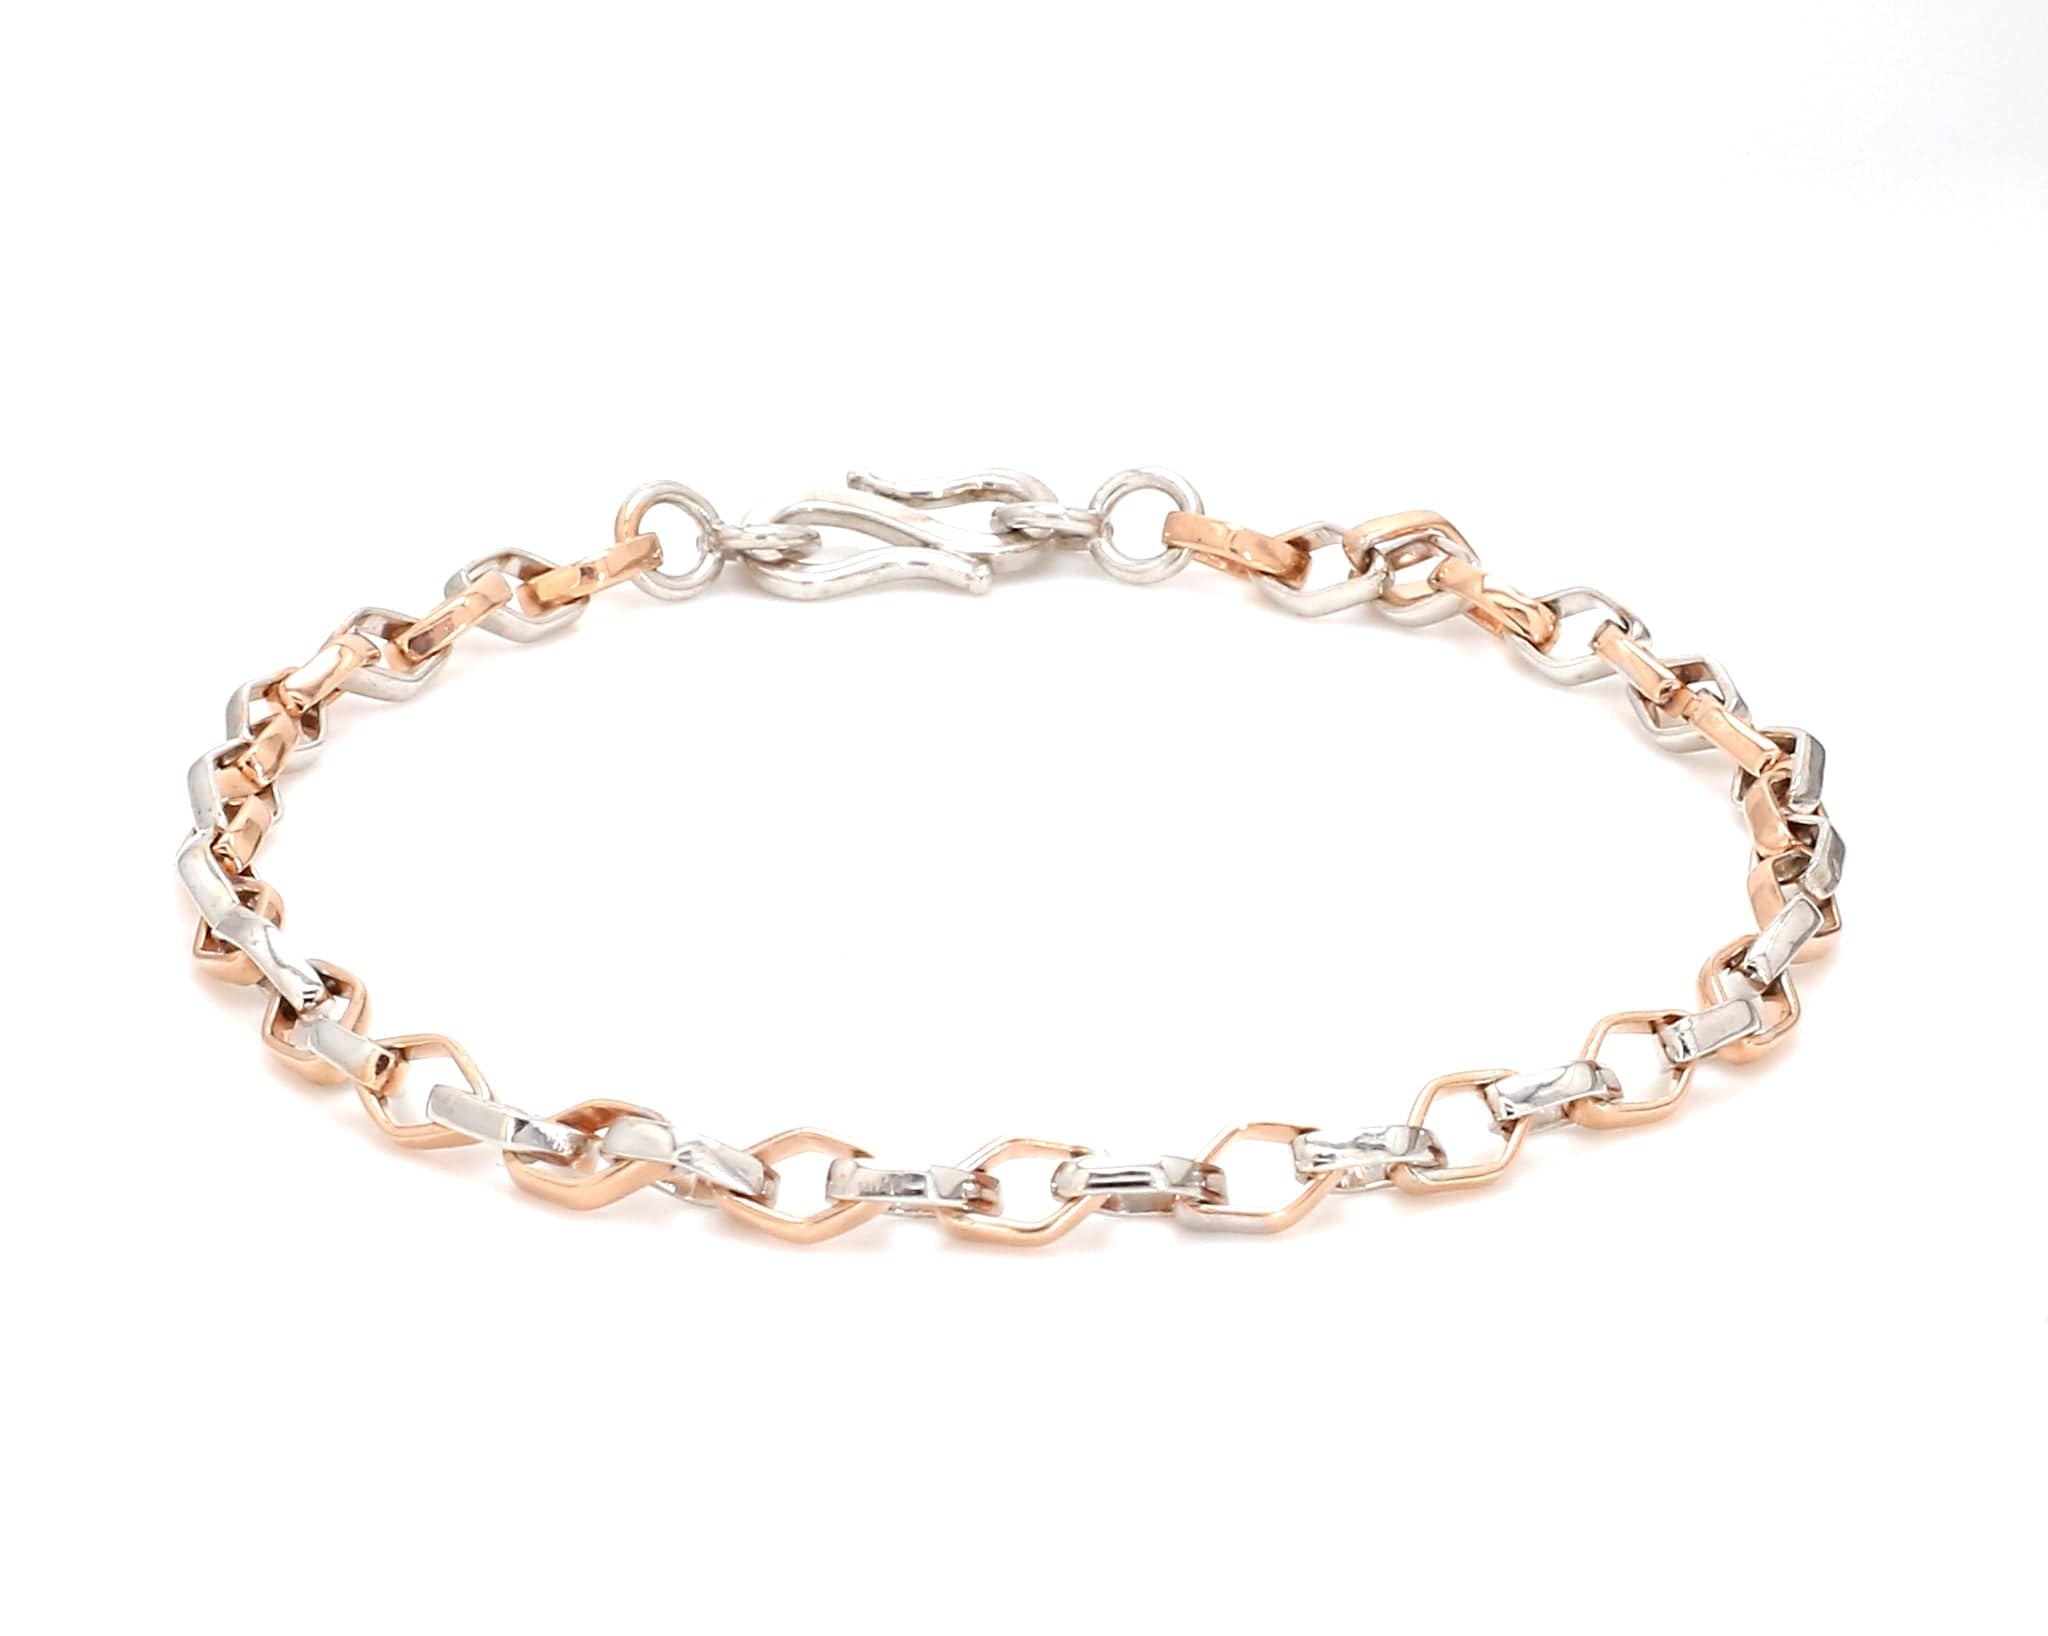 Cable Cuff Cremation Bracelet in 14K Rose Gold – closebymejewelry